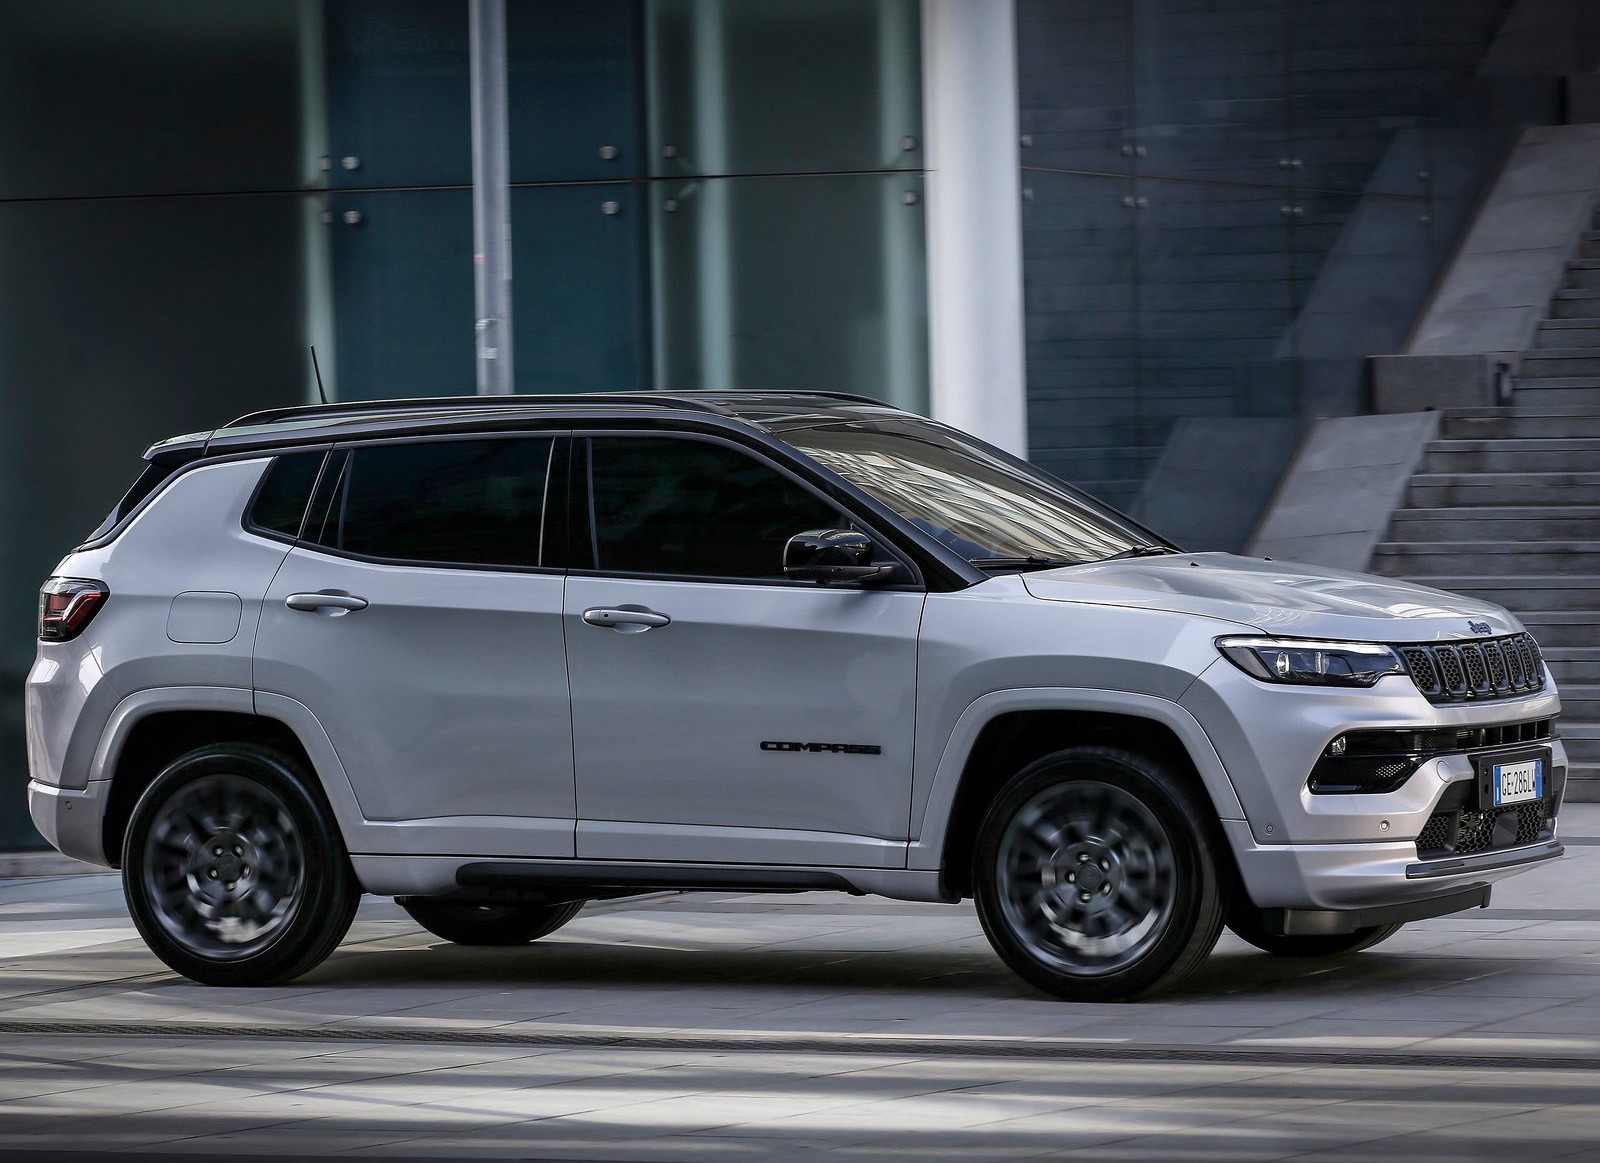 2022 Jeep Compass: Is This the Coolest Shape of a Gadget-Era Jeep